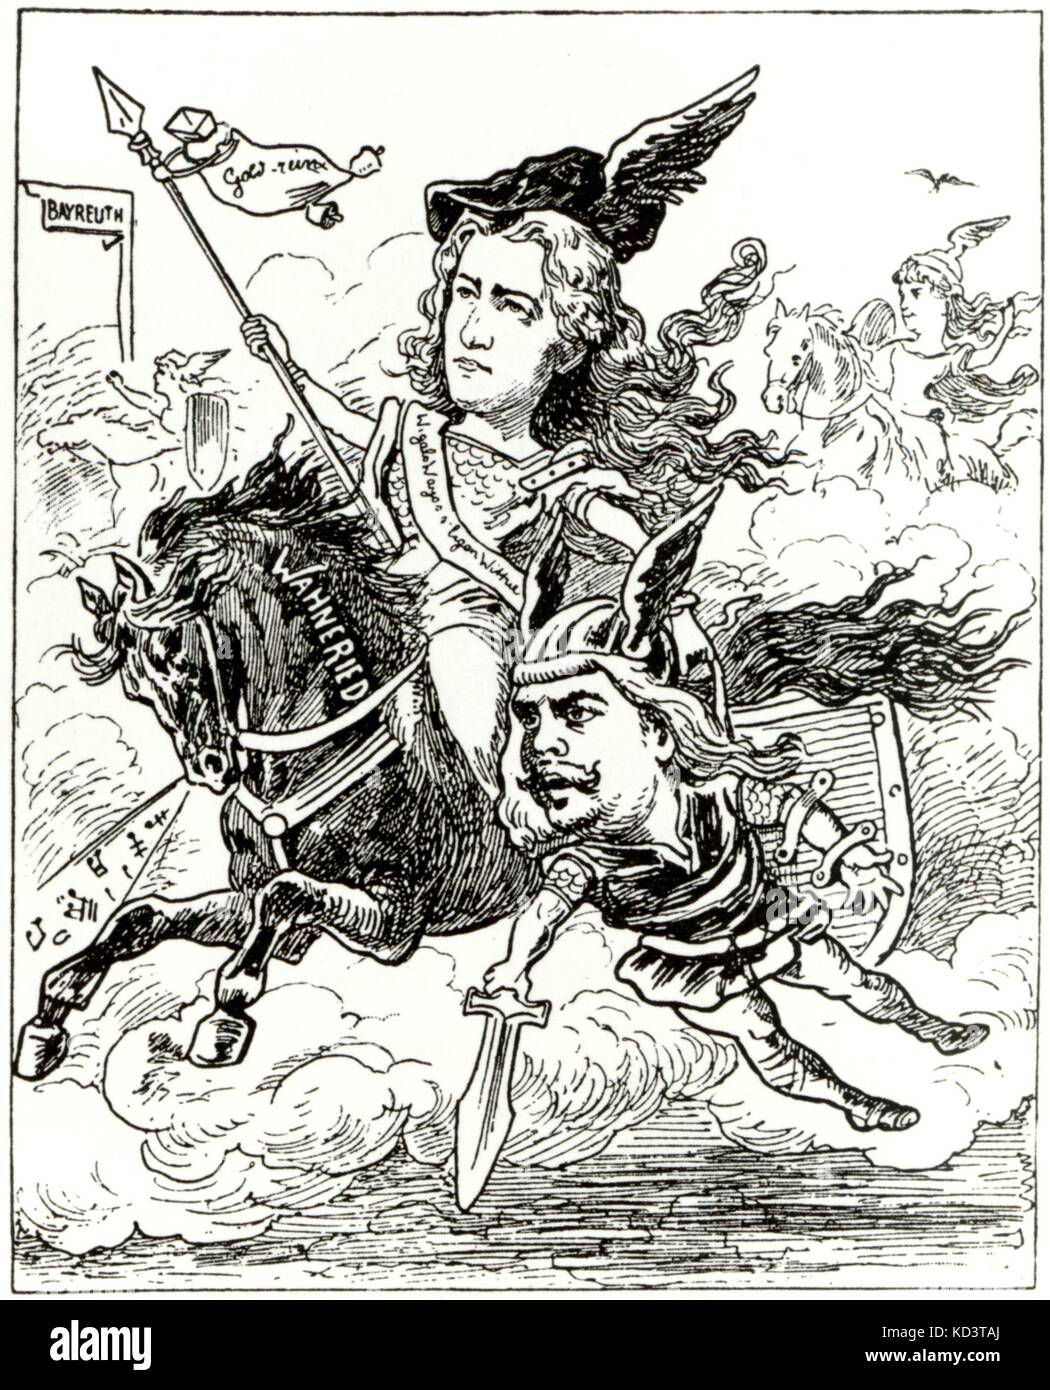 WAGNER, Cosima - caricature - dressed as character from Wagner's opera Ring Cycle / Nibelungen. ' Frau Cosimas Walkürenritt ' ( Miss Cosima's Ride of the Valkeries) Cosima pictured as Brünnhilde, carrying Ernst van Dyck as Siegmund. Die Walkure Stock Photo